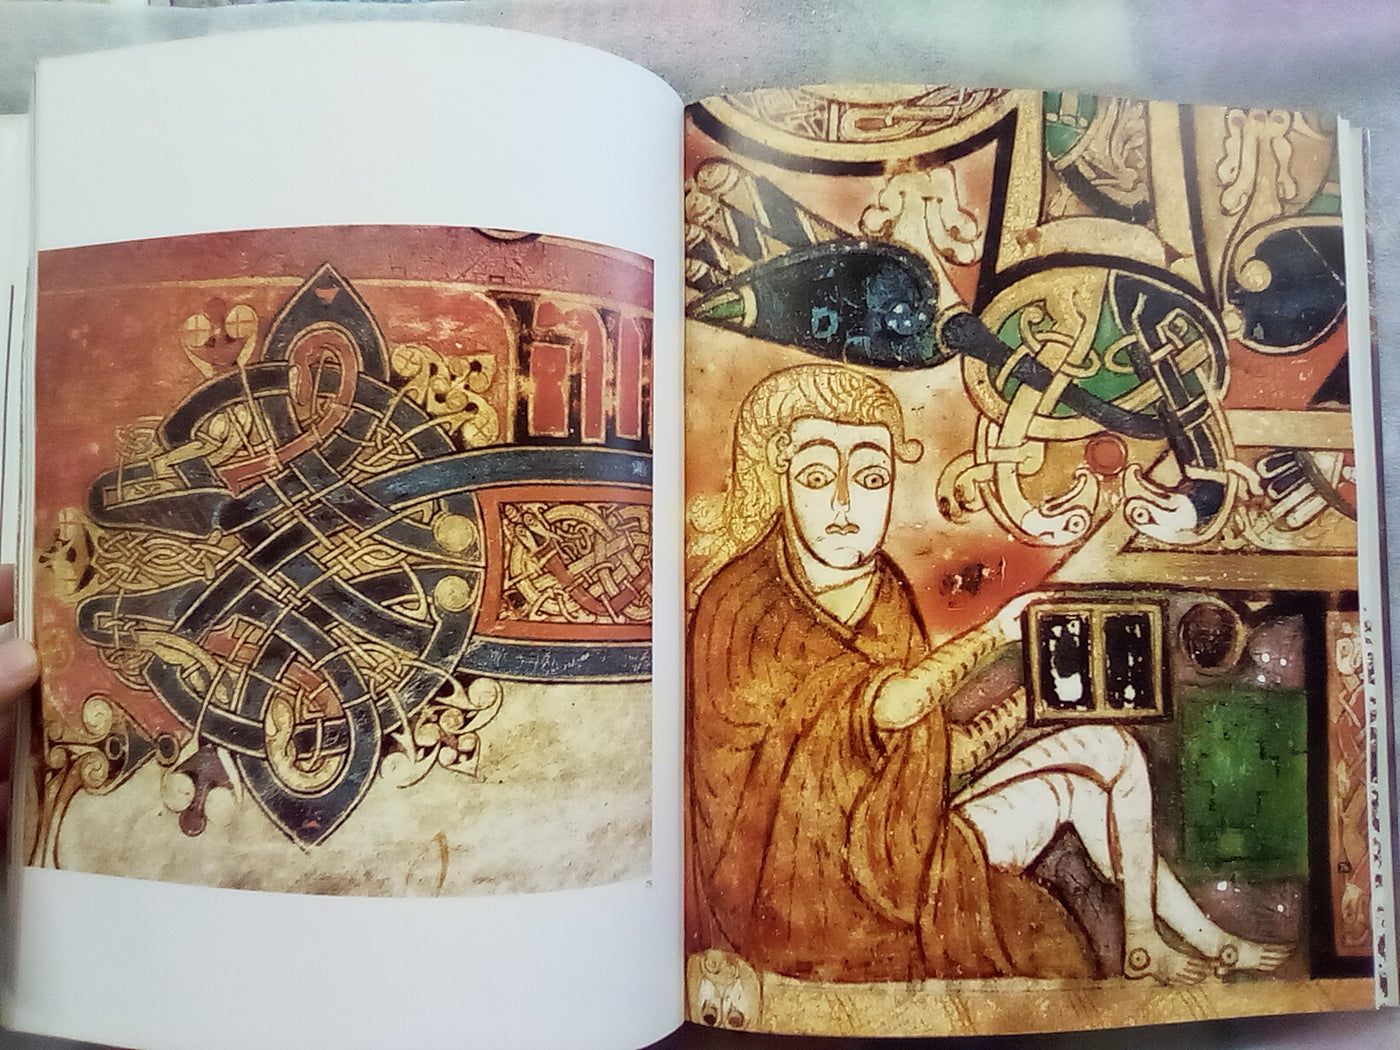 The Golden Age of Irish Art - The Medieval Achievement 600-1200AD